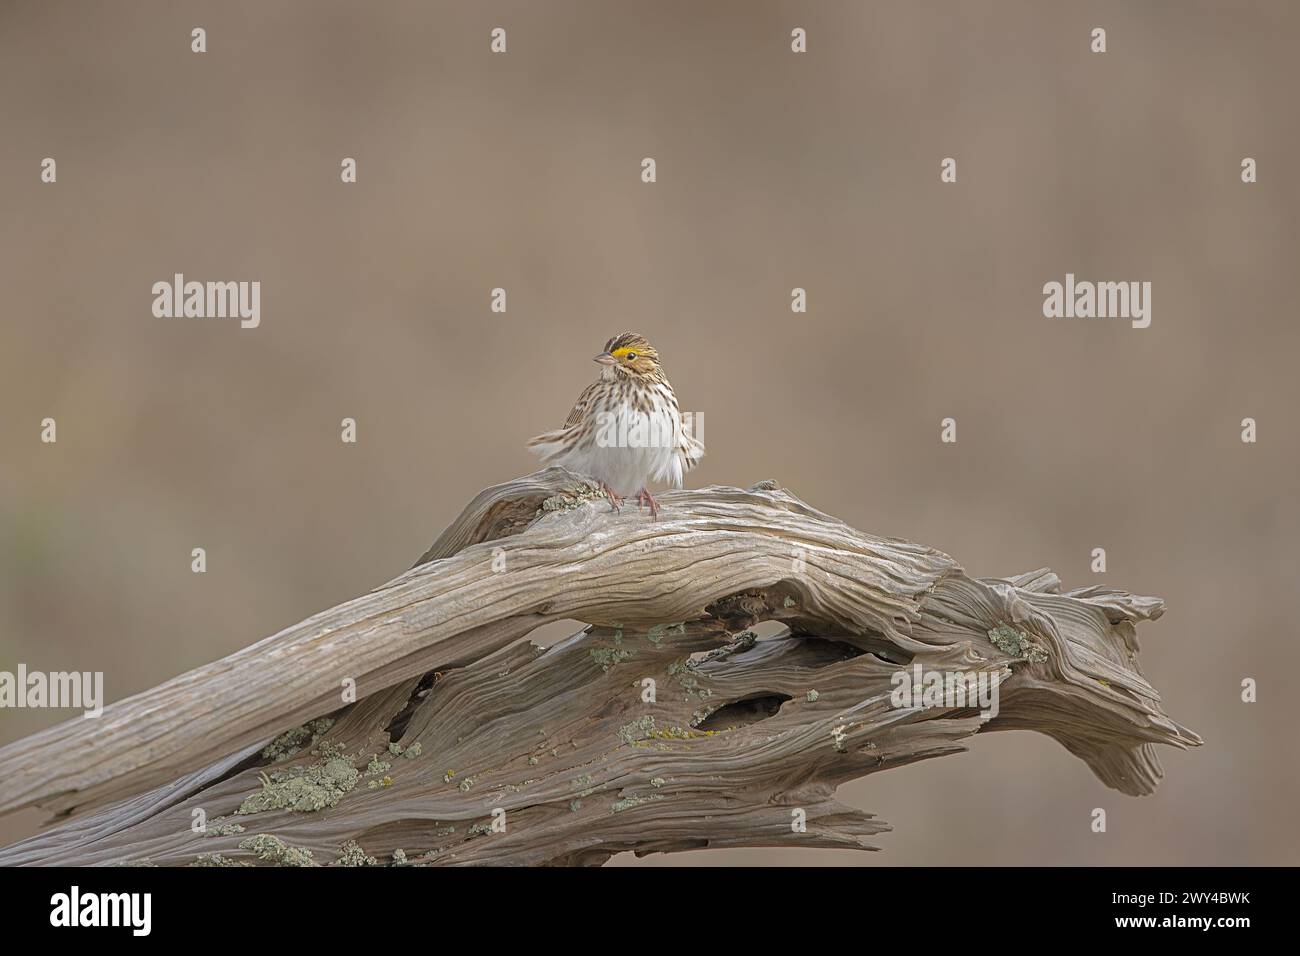 A savannah sparrow (Passerculus sandwichensis) sits on driftwood, its feathers flowing in the wind in British Columbia, Canada Stock Photo